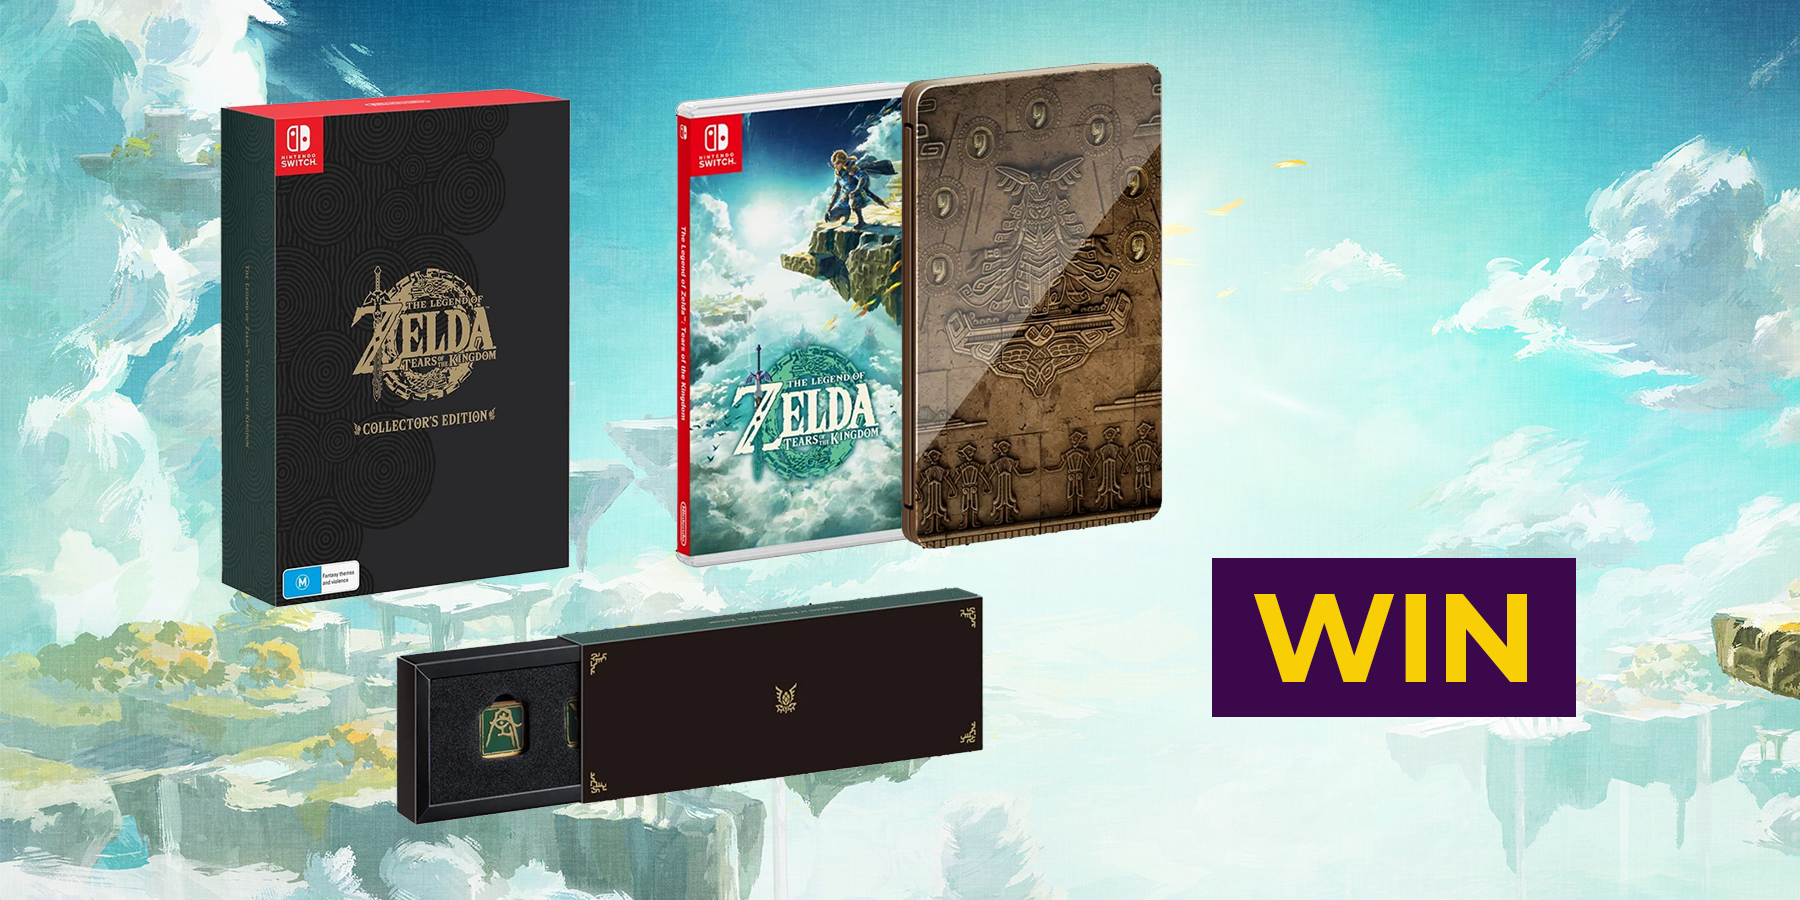 Win Tears of the Kingdom Collector's Edition